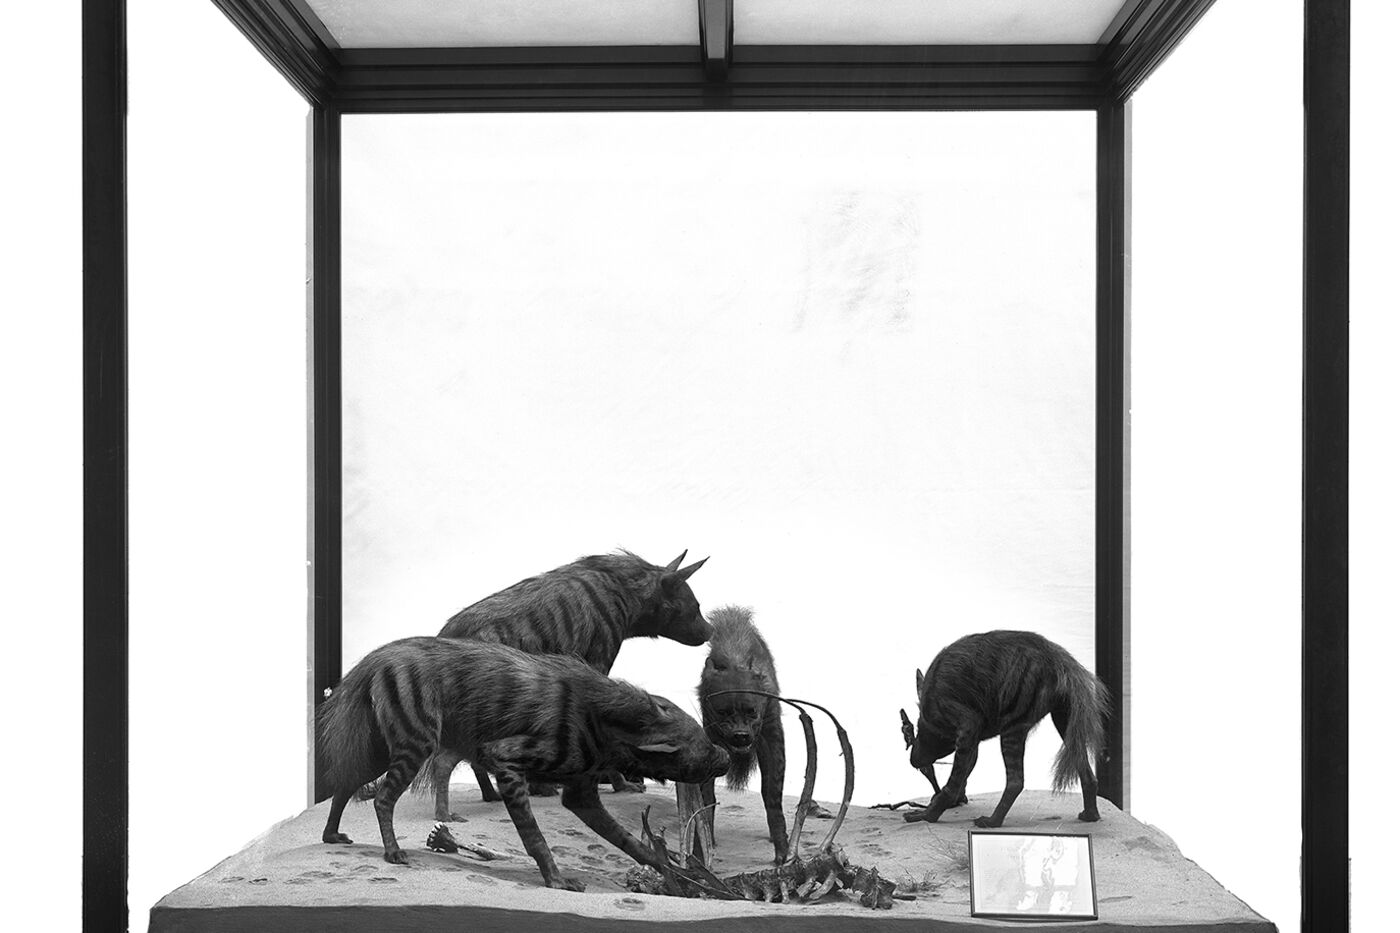 The striped hyena diorama as it appeared in about 1898, 4 hyenas feeding on a carcass in a large wood and glass display case.